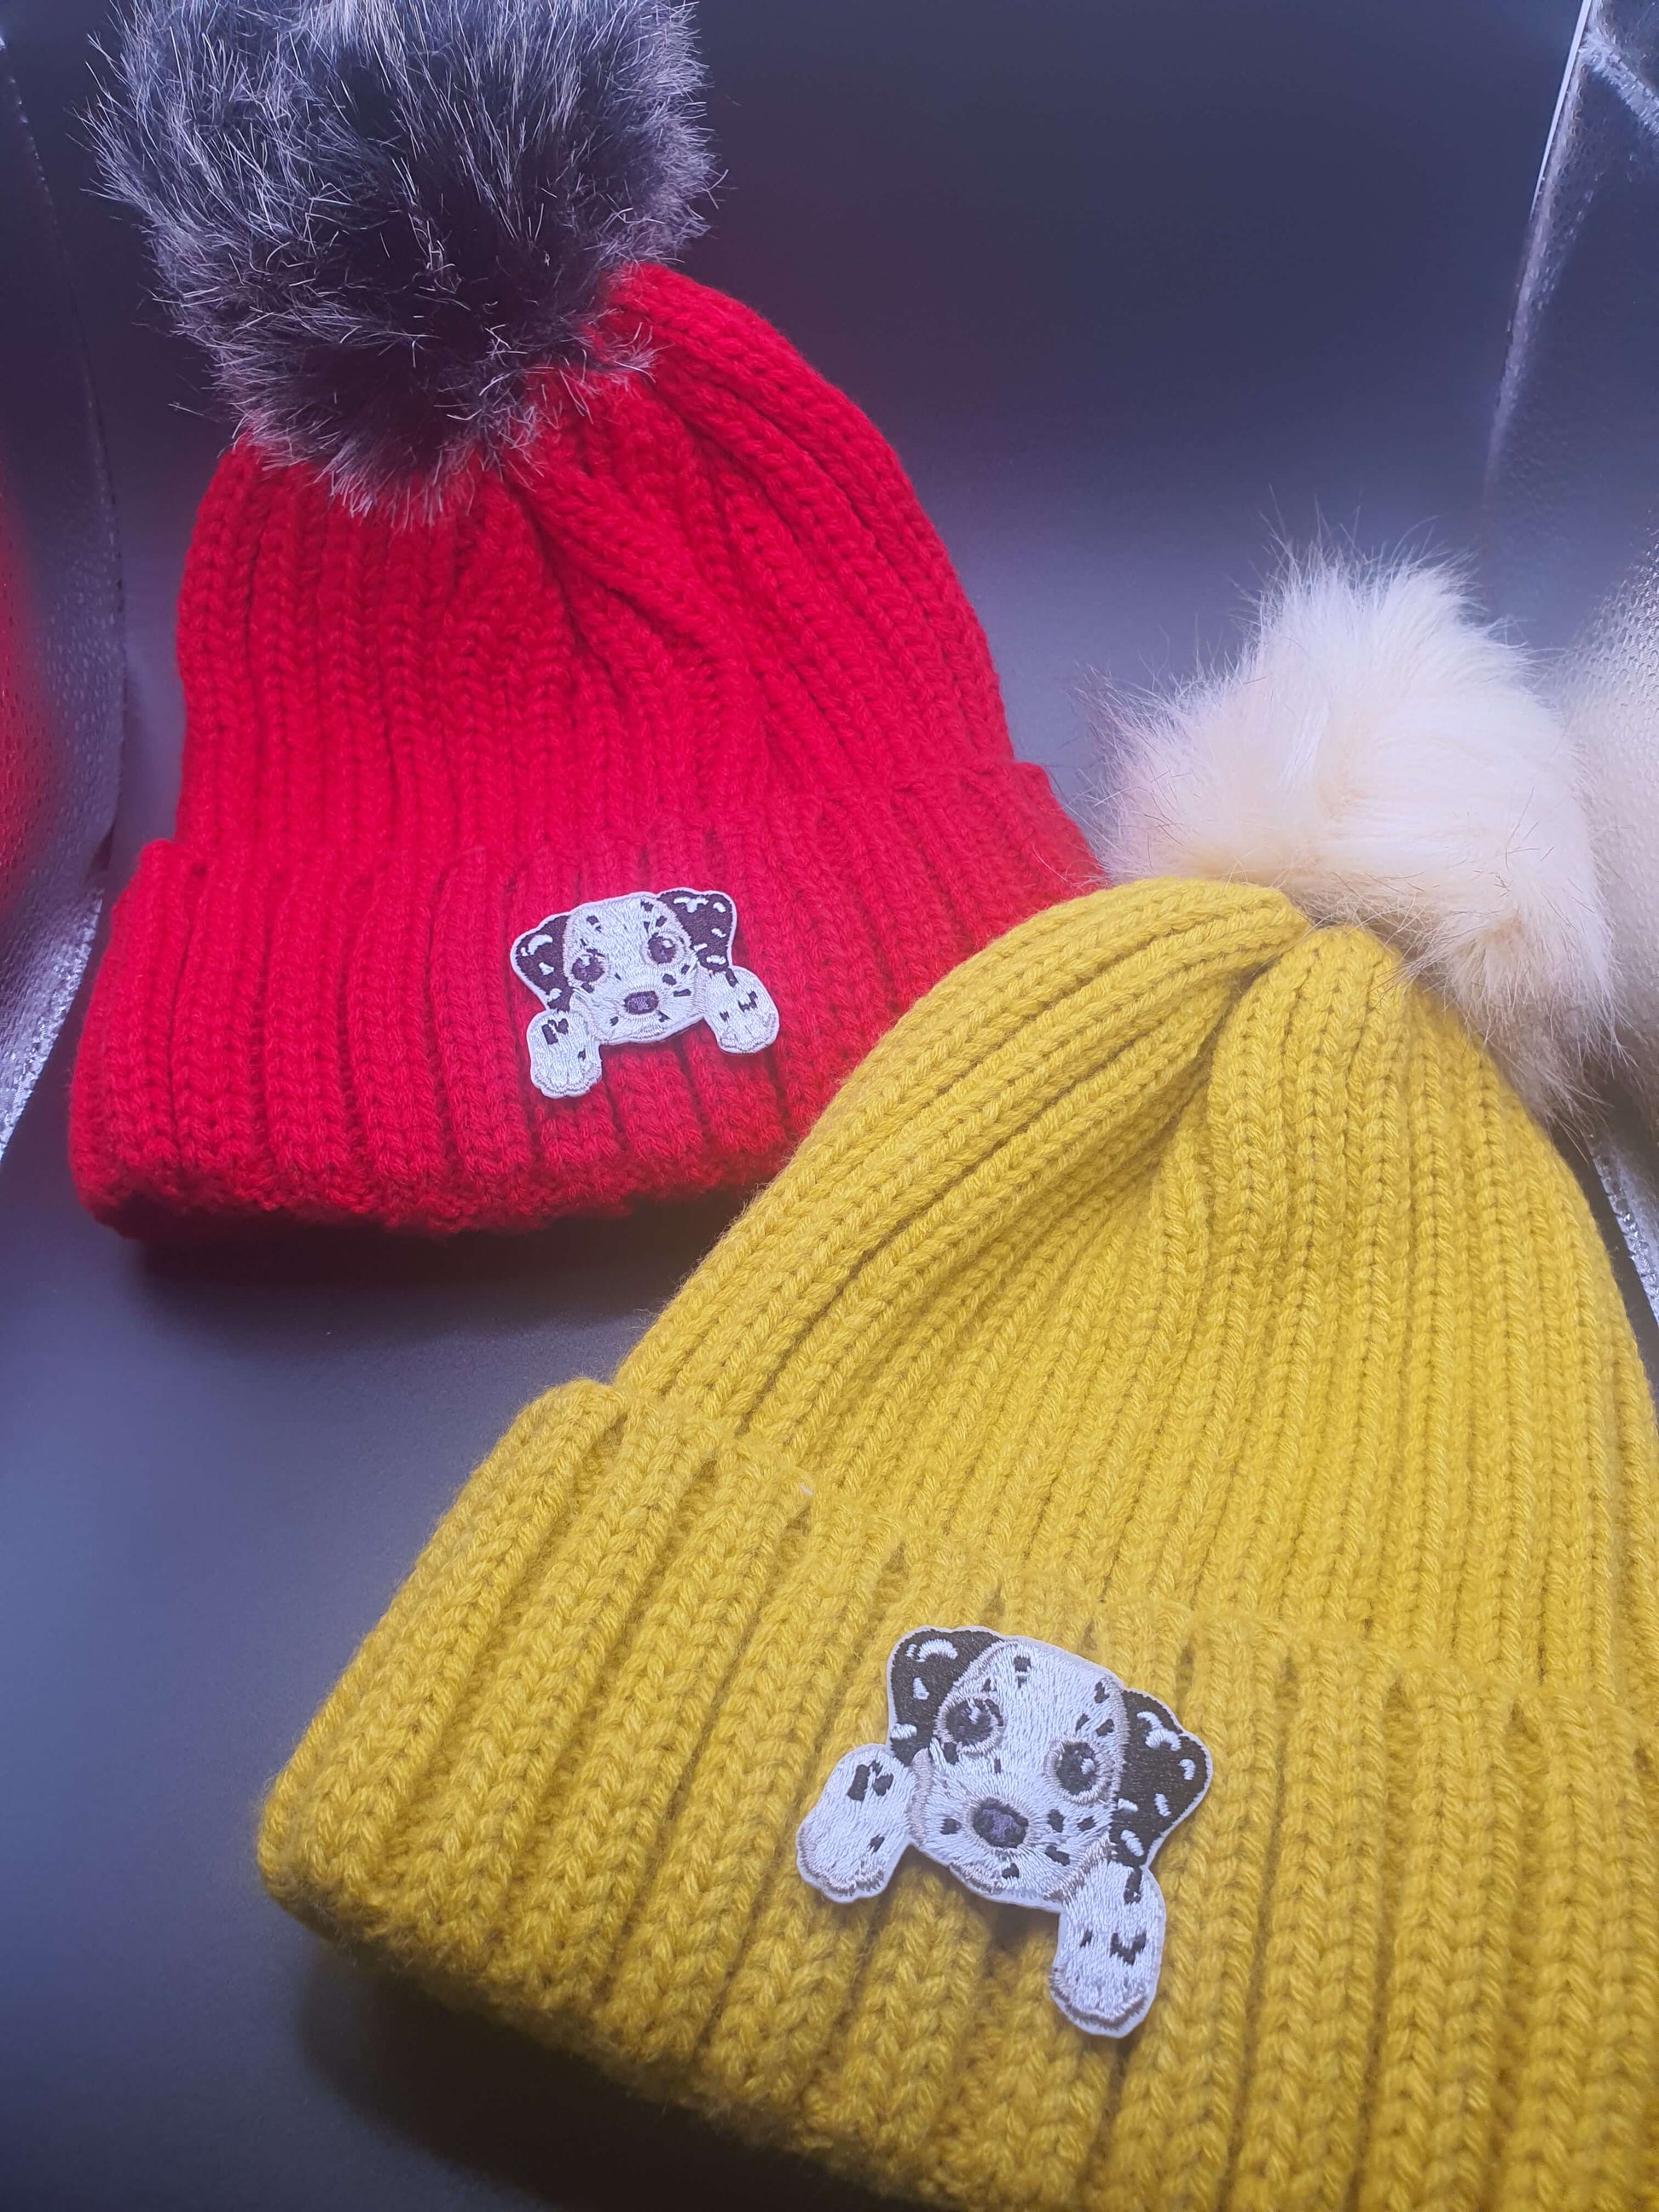 Dog Themed Knitted Beanies - Style's Bug Dalmatian / Both (25% OFF)